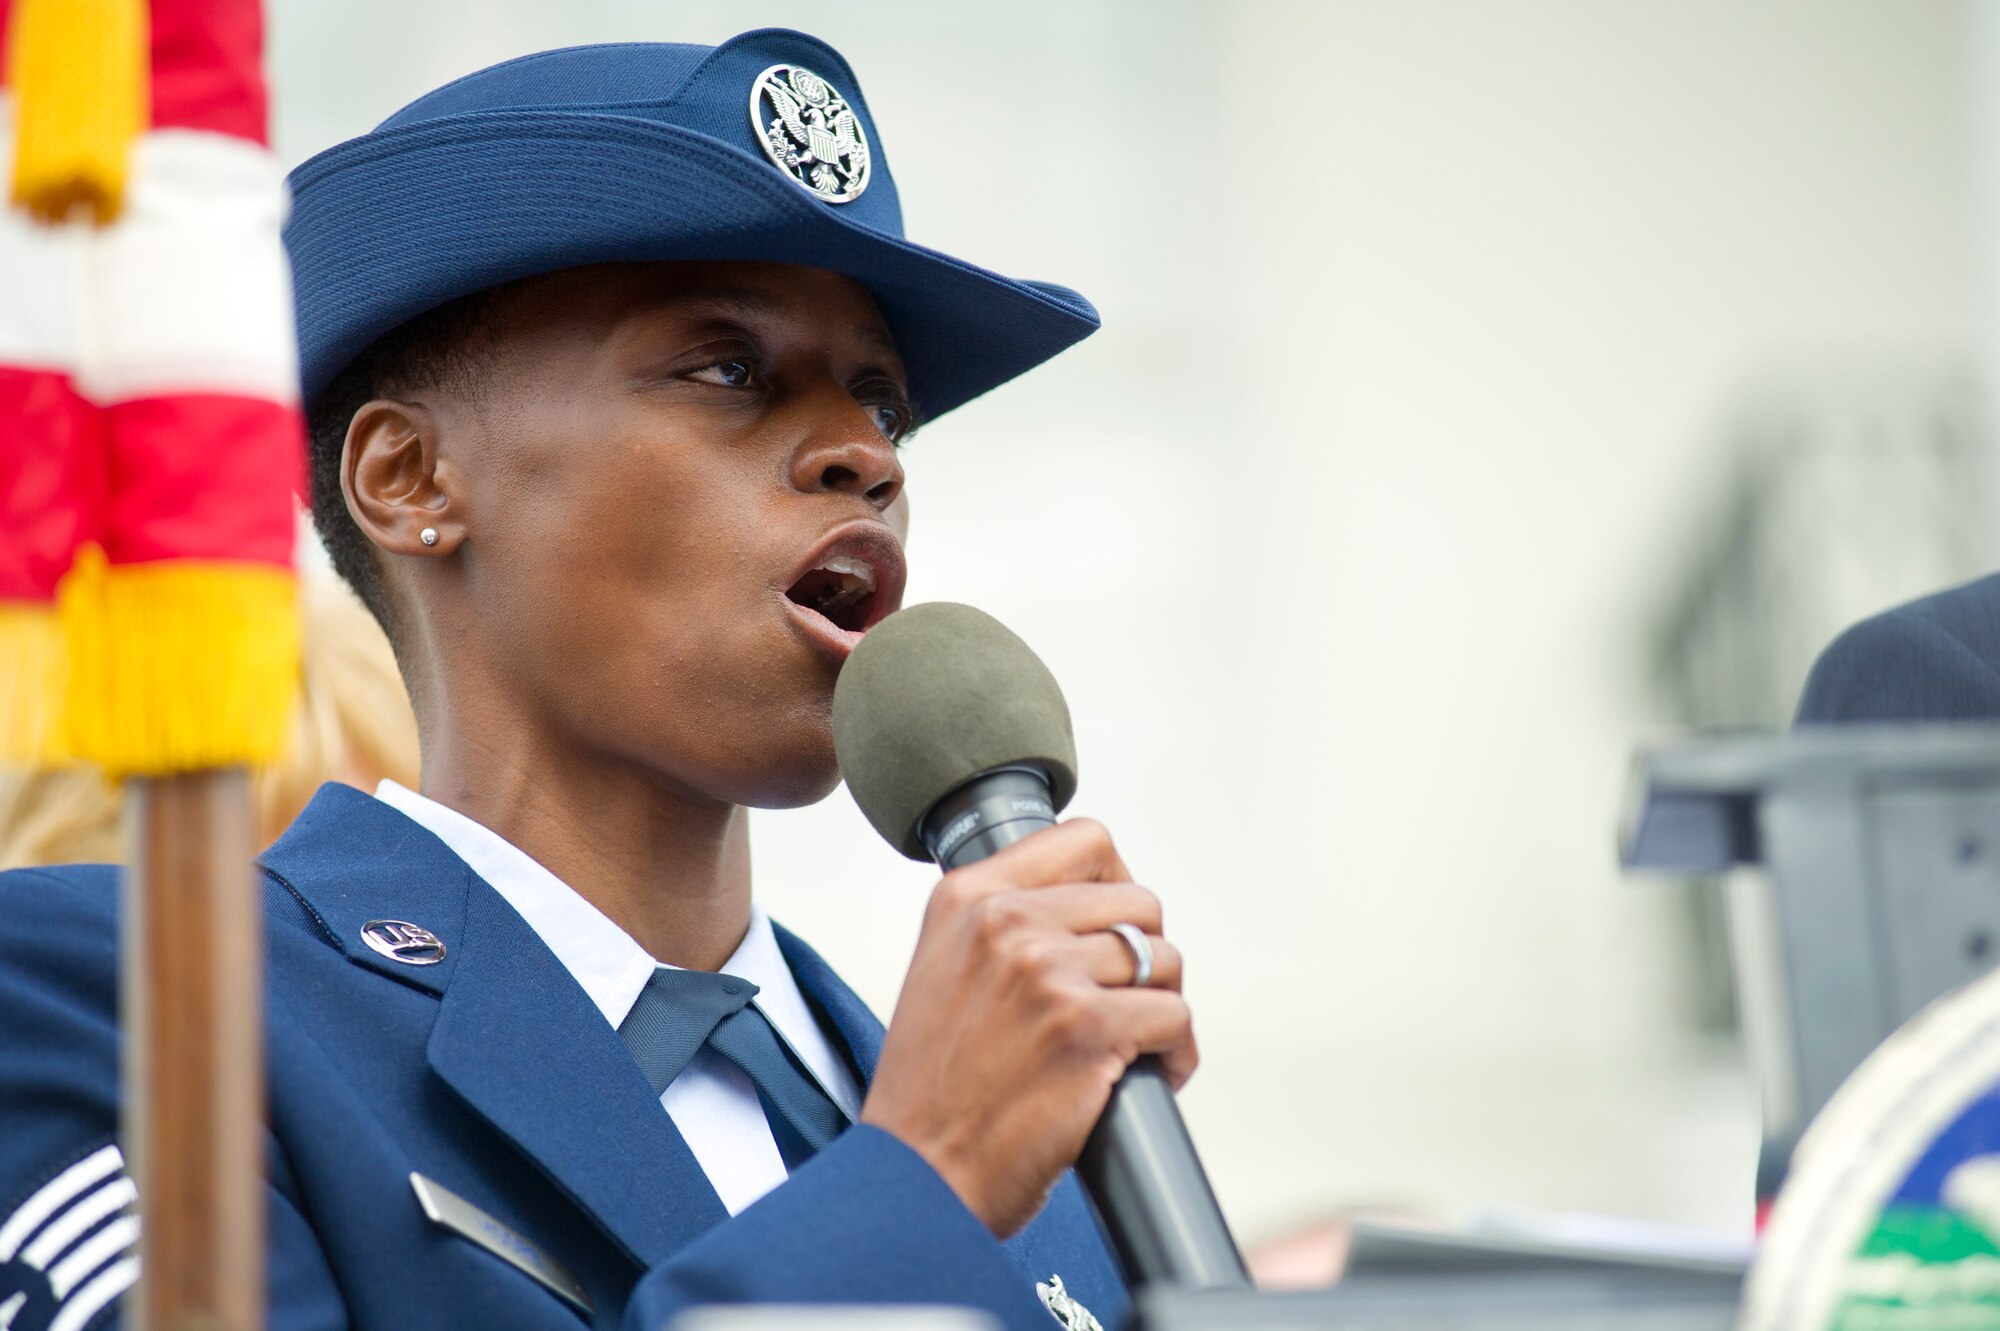 Staff Sgt. Karen Moore, 403rd Wing, Keesler Air Force Base, Miss., sings the National Anthem during the 12th annual Gulf Coast Veteran's Parade Nov. 10, 2012, in Gulfport.  Brig. Gen. Brad Spacy, 81st Training Wing commander, and Col. Rene Romero, 81st TRW vice commander, led participants from Keesler.  Keesler marching units included the honor guard, the 50 state flags carried by the 334th Training Squadron, student marching groups from the 335th and 336th Training Squadrons and the 81st Training Group’s drum and bugle corps. (U.S. Air Force photo by Adam Bond)